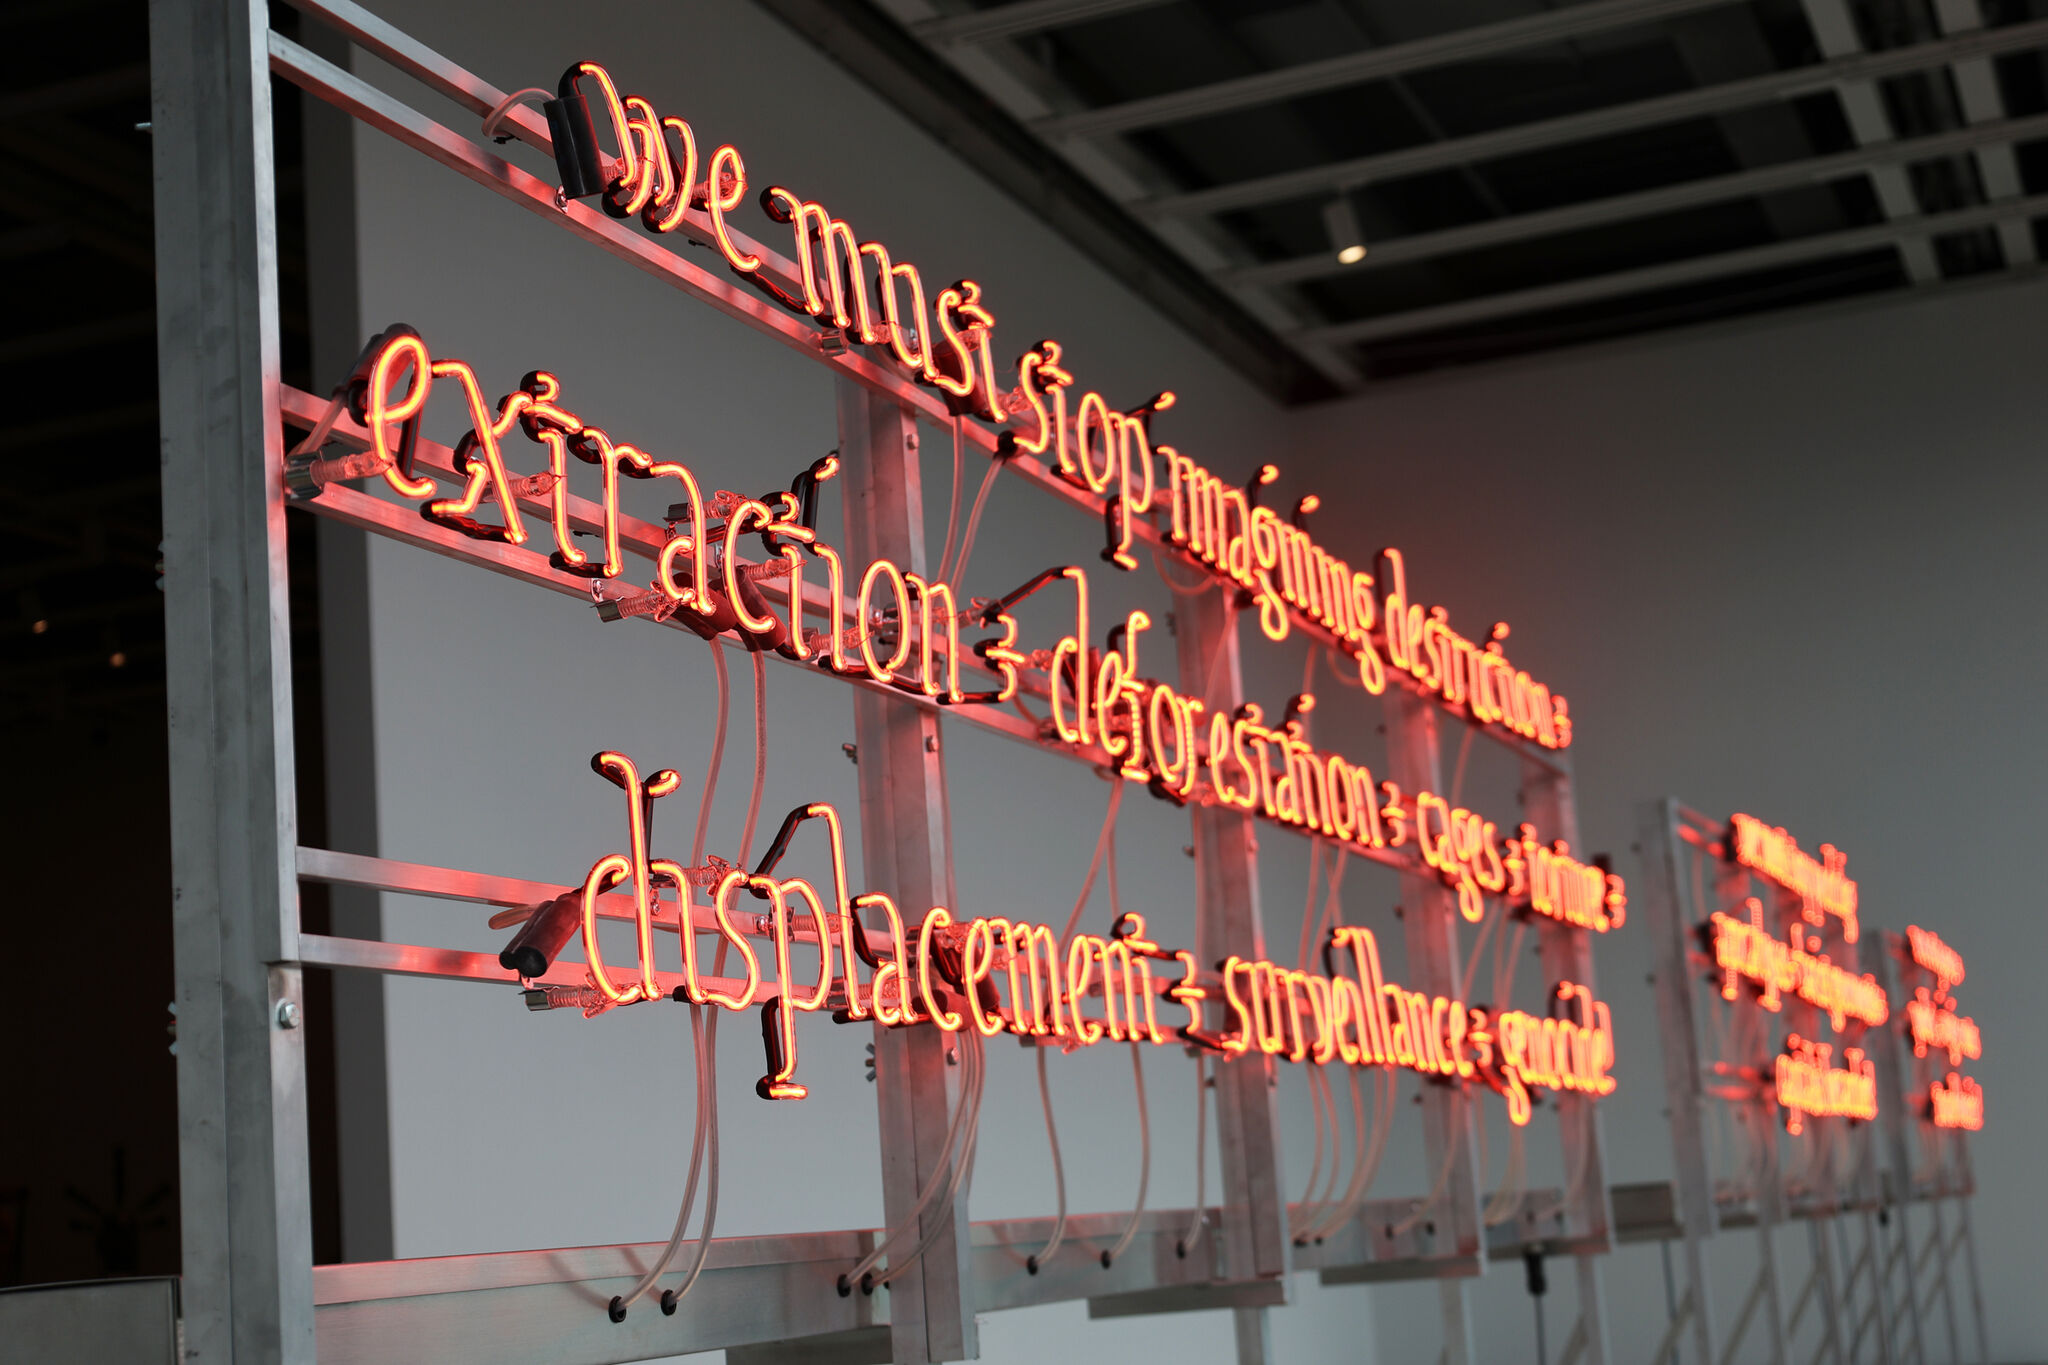 Neon light installation with words against a gallery wall.